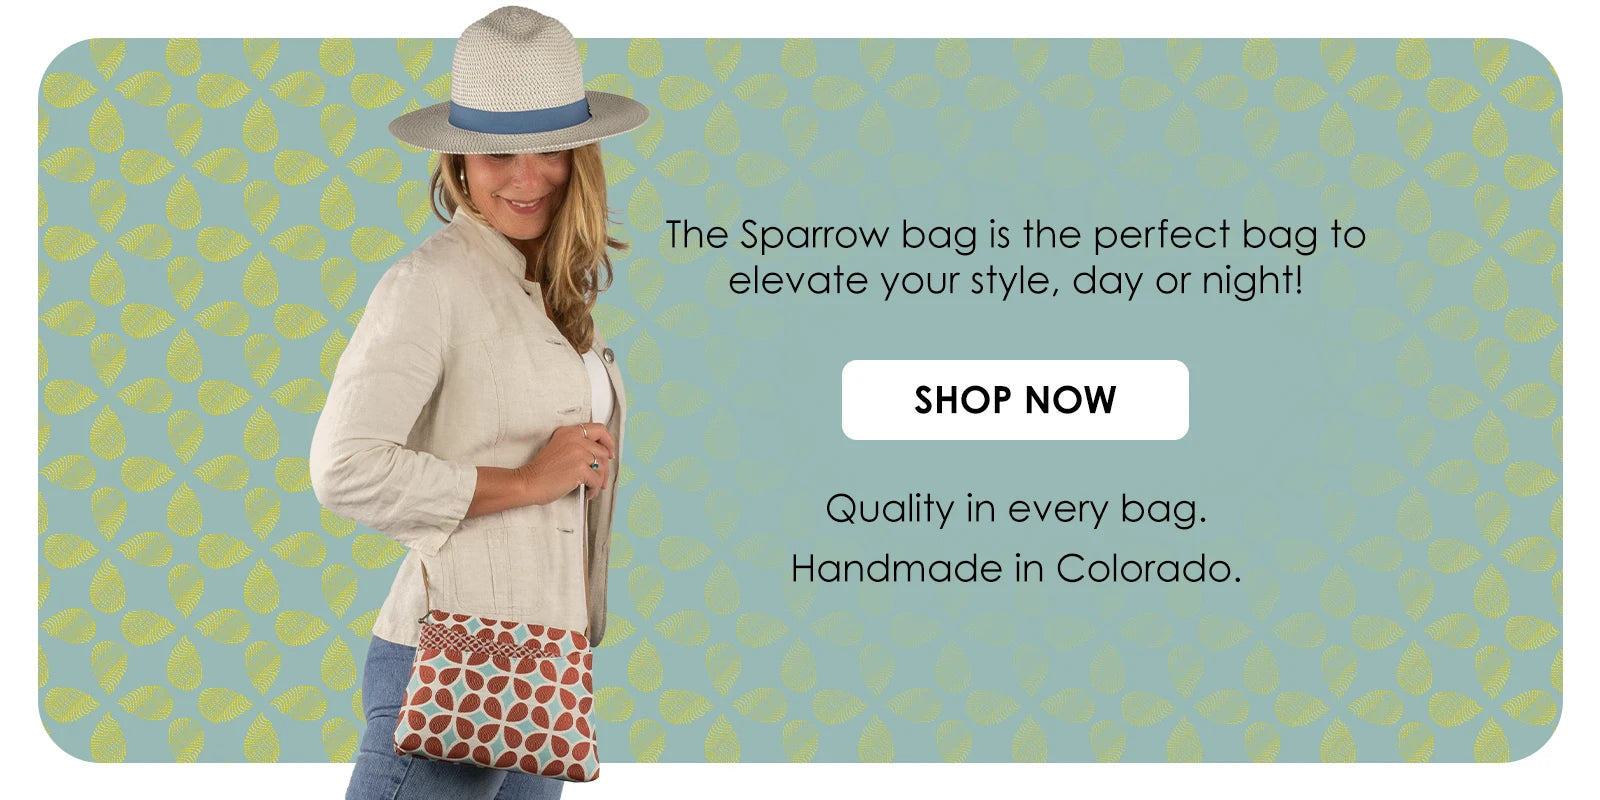 Maruca's Sparrow bag is perfect for day or night!